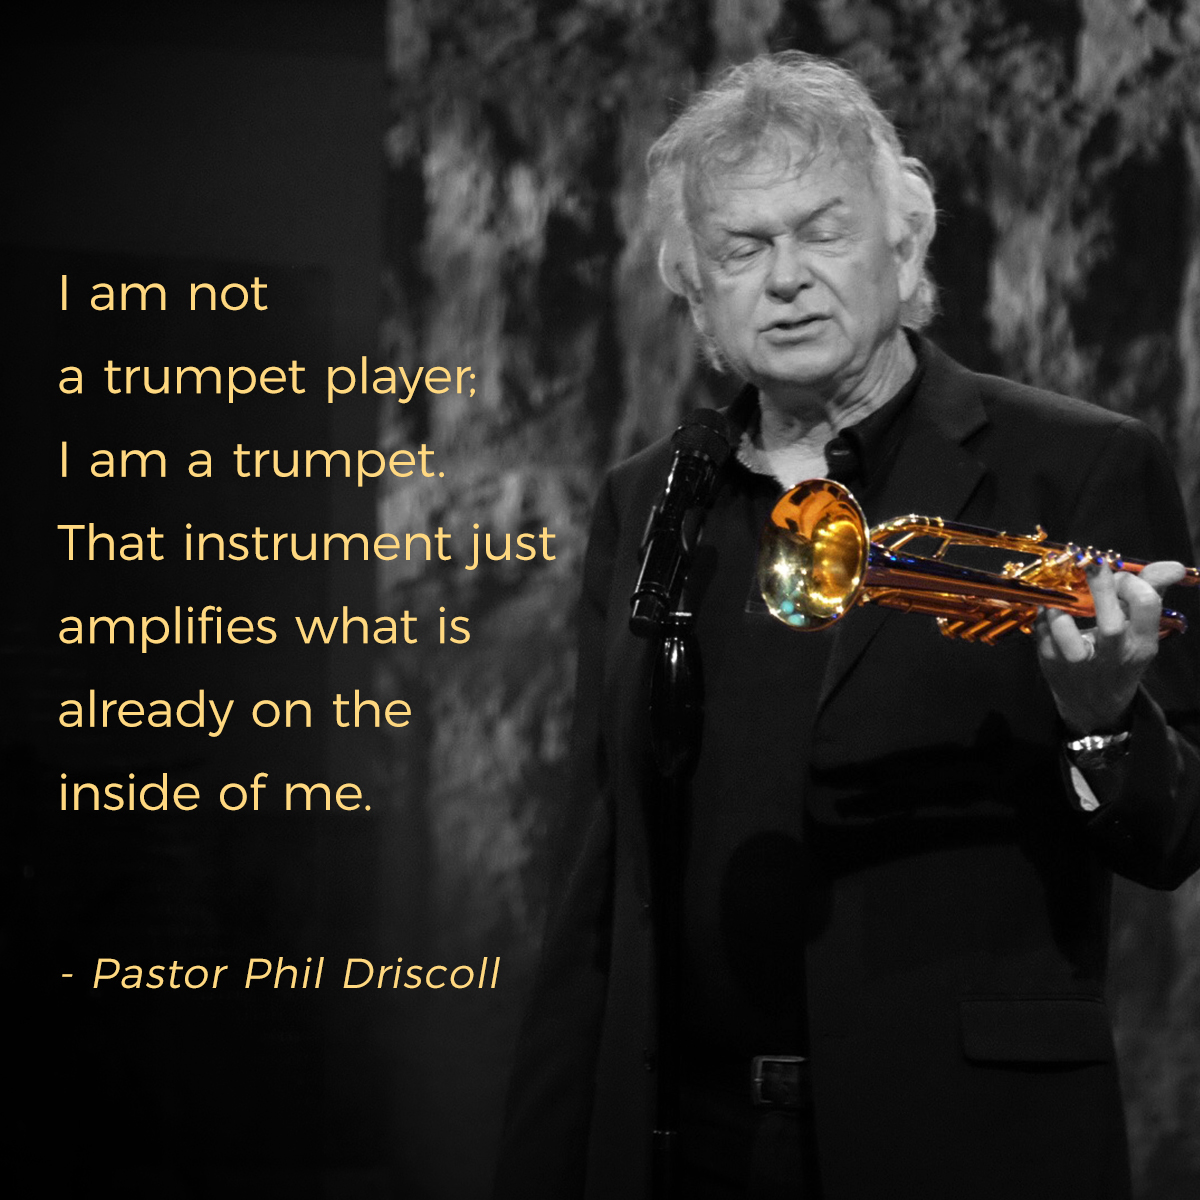 “I am not a trumpet player; I am a trumpet. That instrument just amplifies what is already on the inside of me.” – Pastor Phil Driscoll